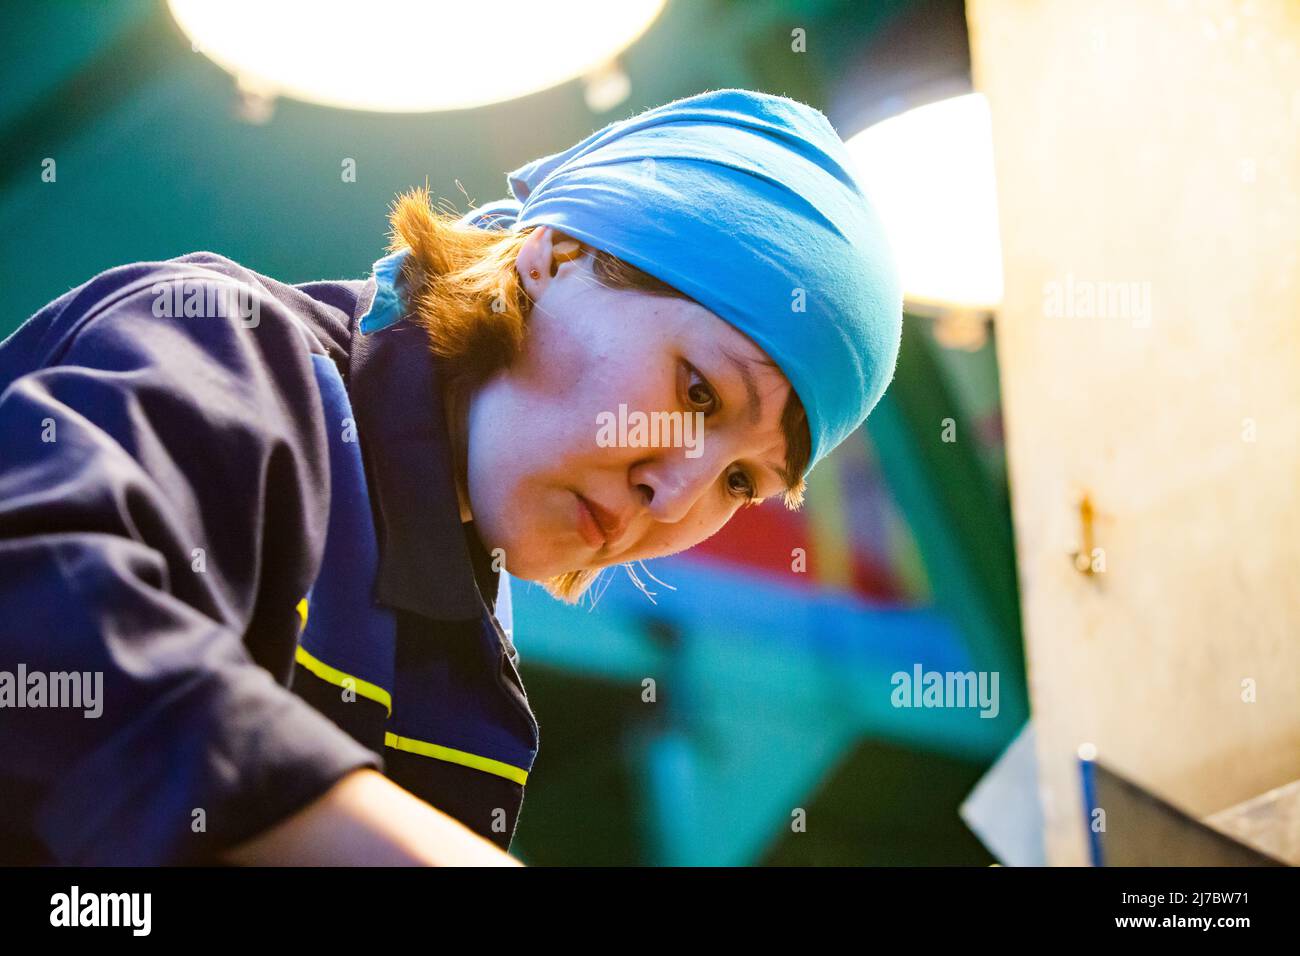 Ust'-Kamenogorsk, Kazakhstan - May 31, 2012: Portrait of young attractive Asian worker woman in blue bandana. Working on titanium ore conveyor. Stock Photo